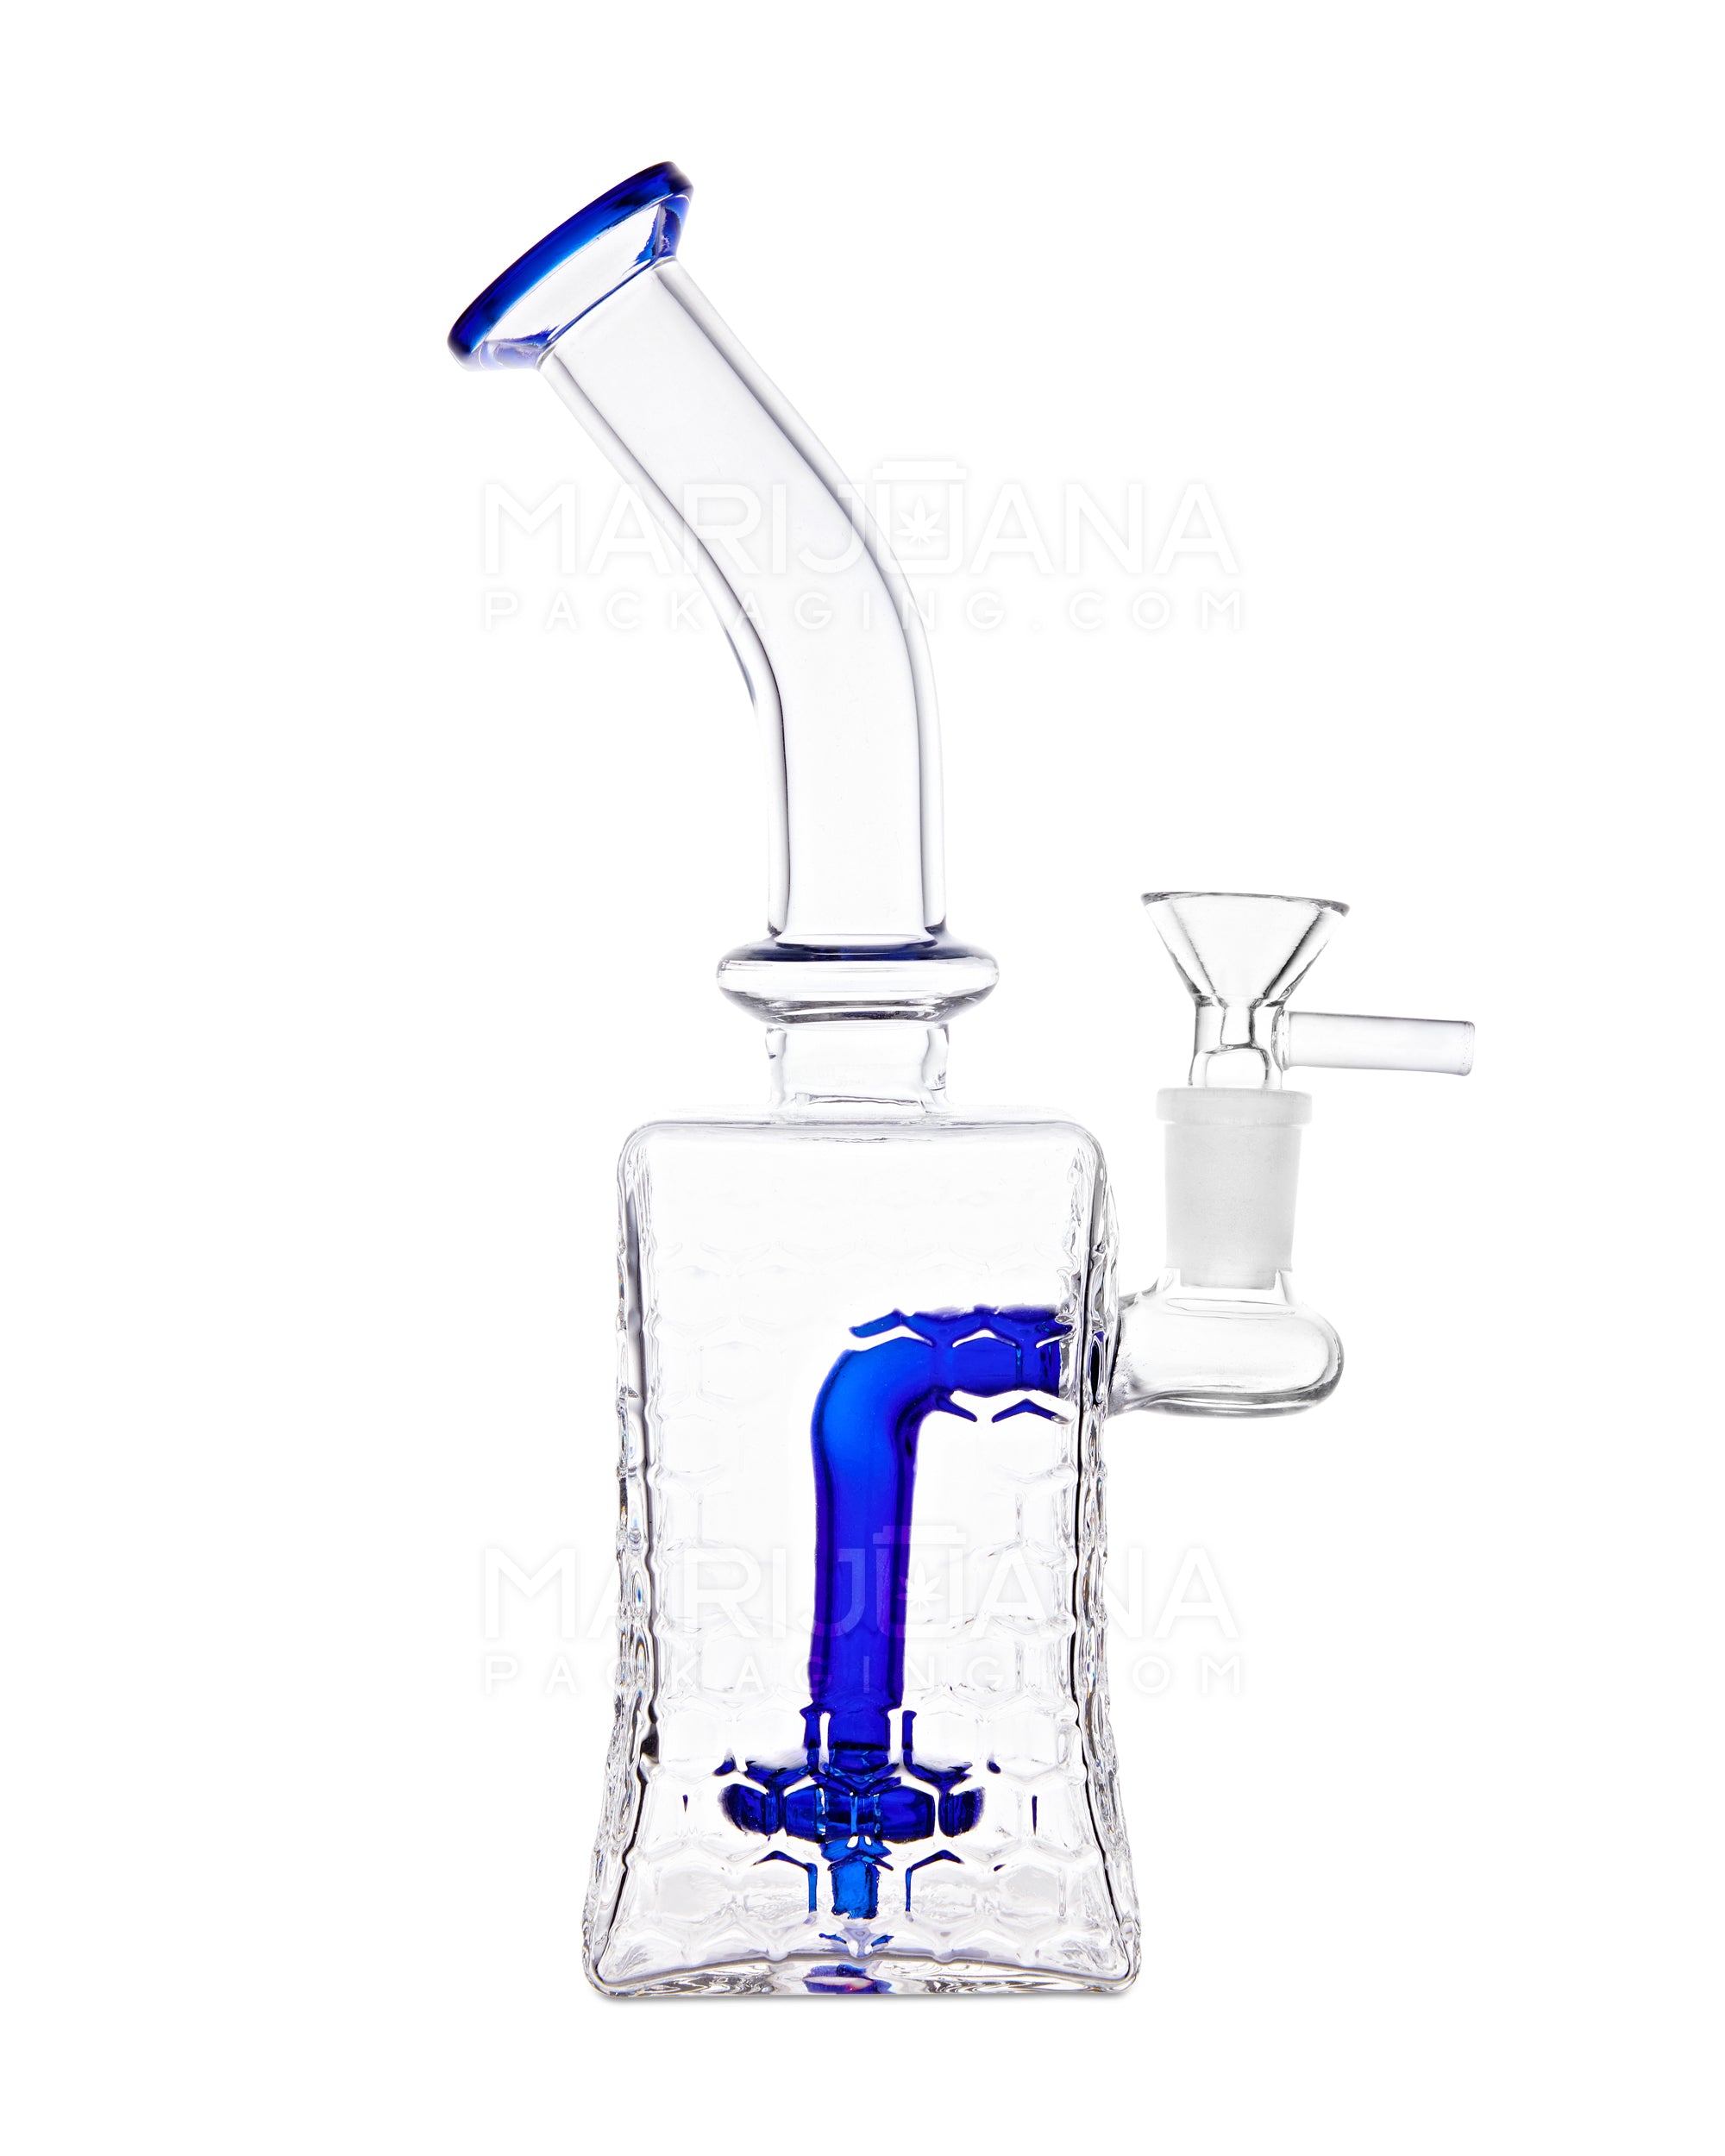 Bent Neck Honeycomb Speckled Square Glass Water Pipe w/ Showerhead Perc | 9in Tall - 14mm Bowl - Blue